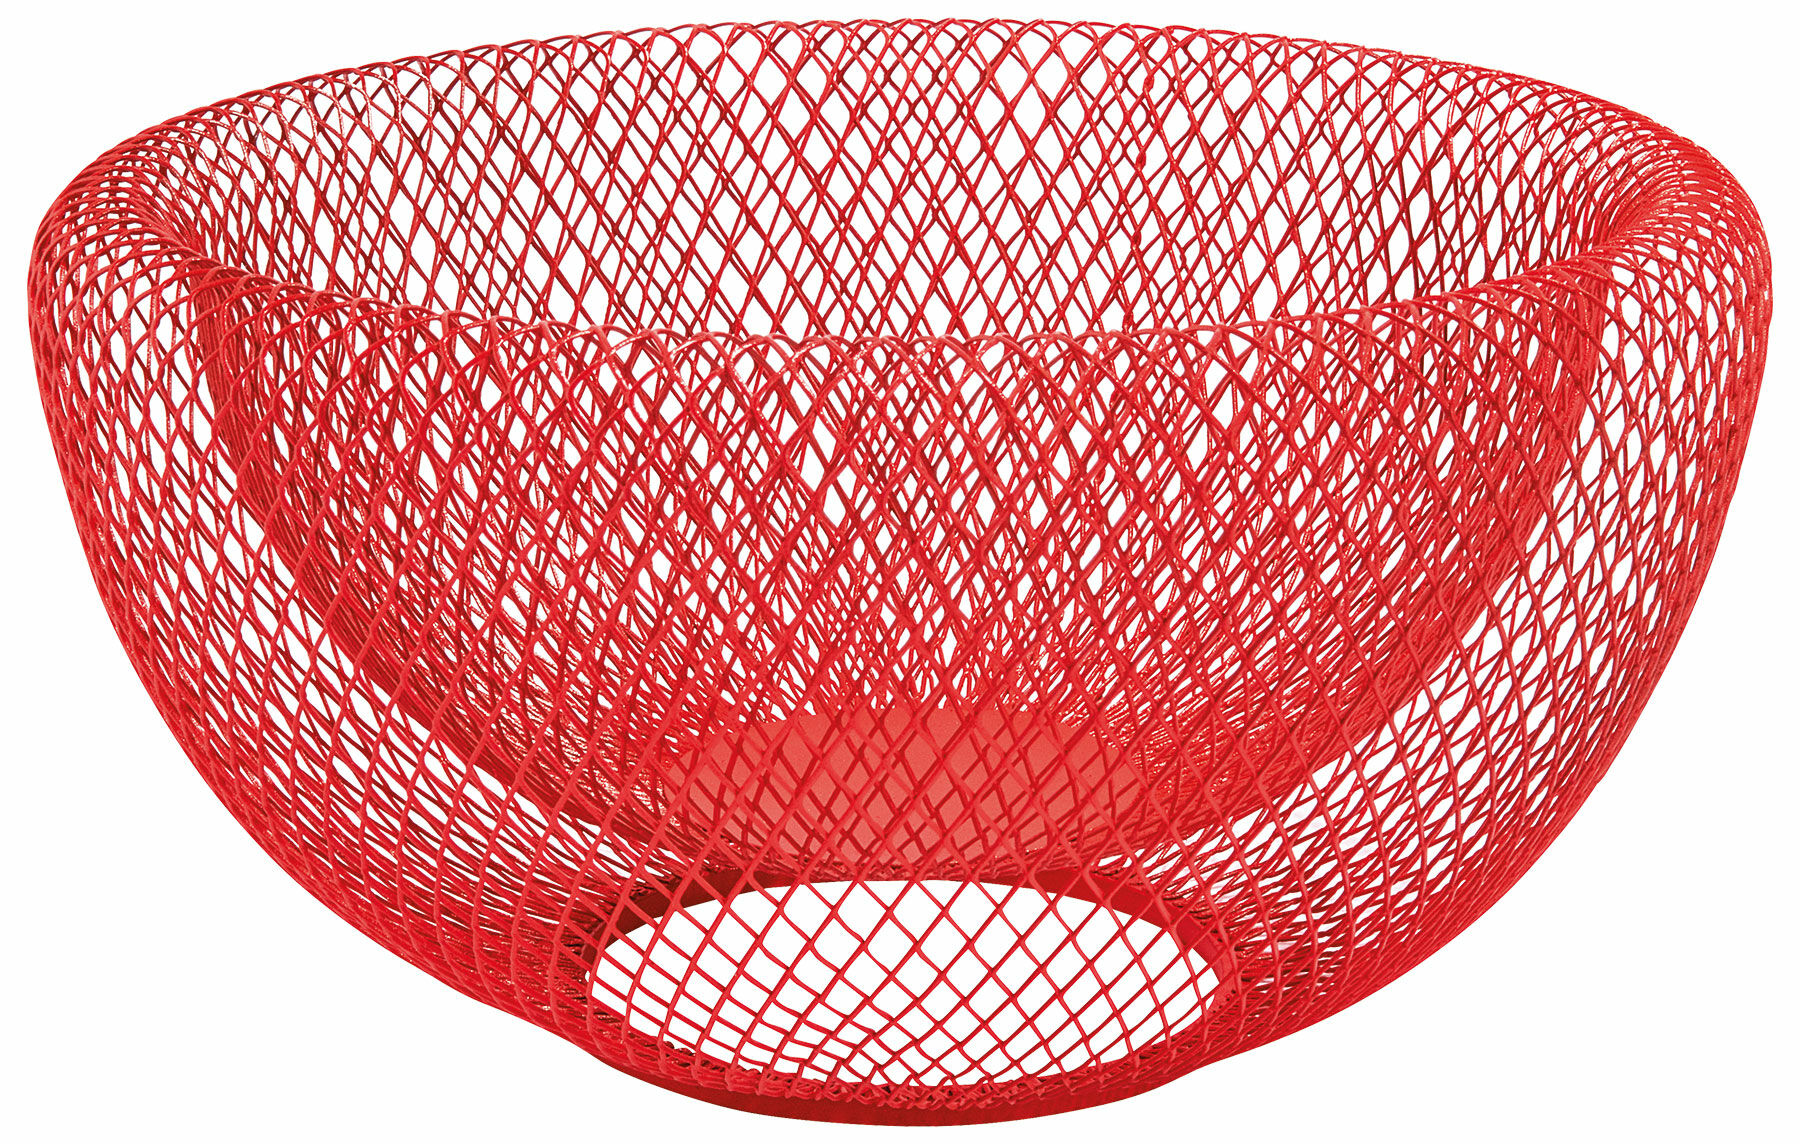 Coupe à fruits "Mesh", version rouge - Collection MoMA